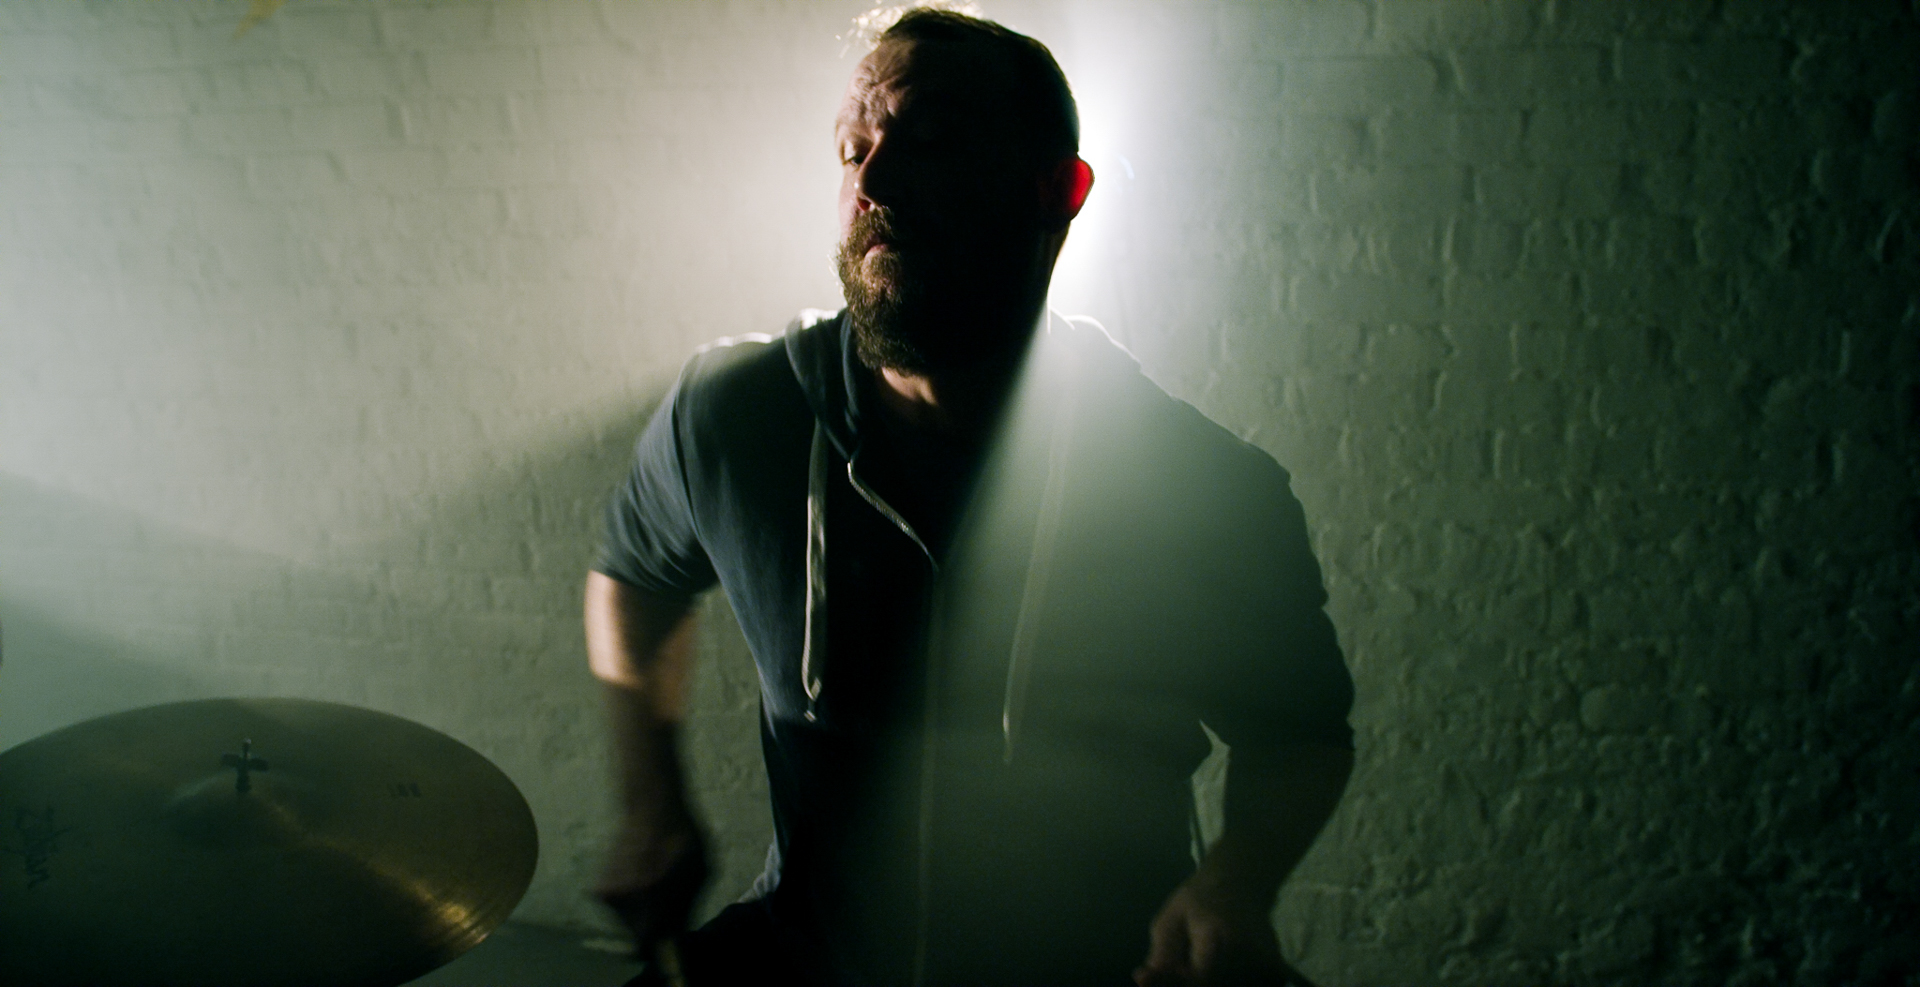 drummer in dark shadows with strong backlight plays drums